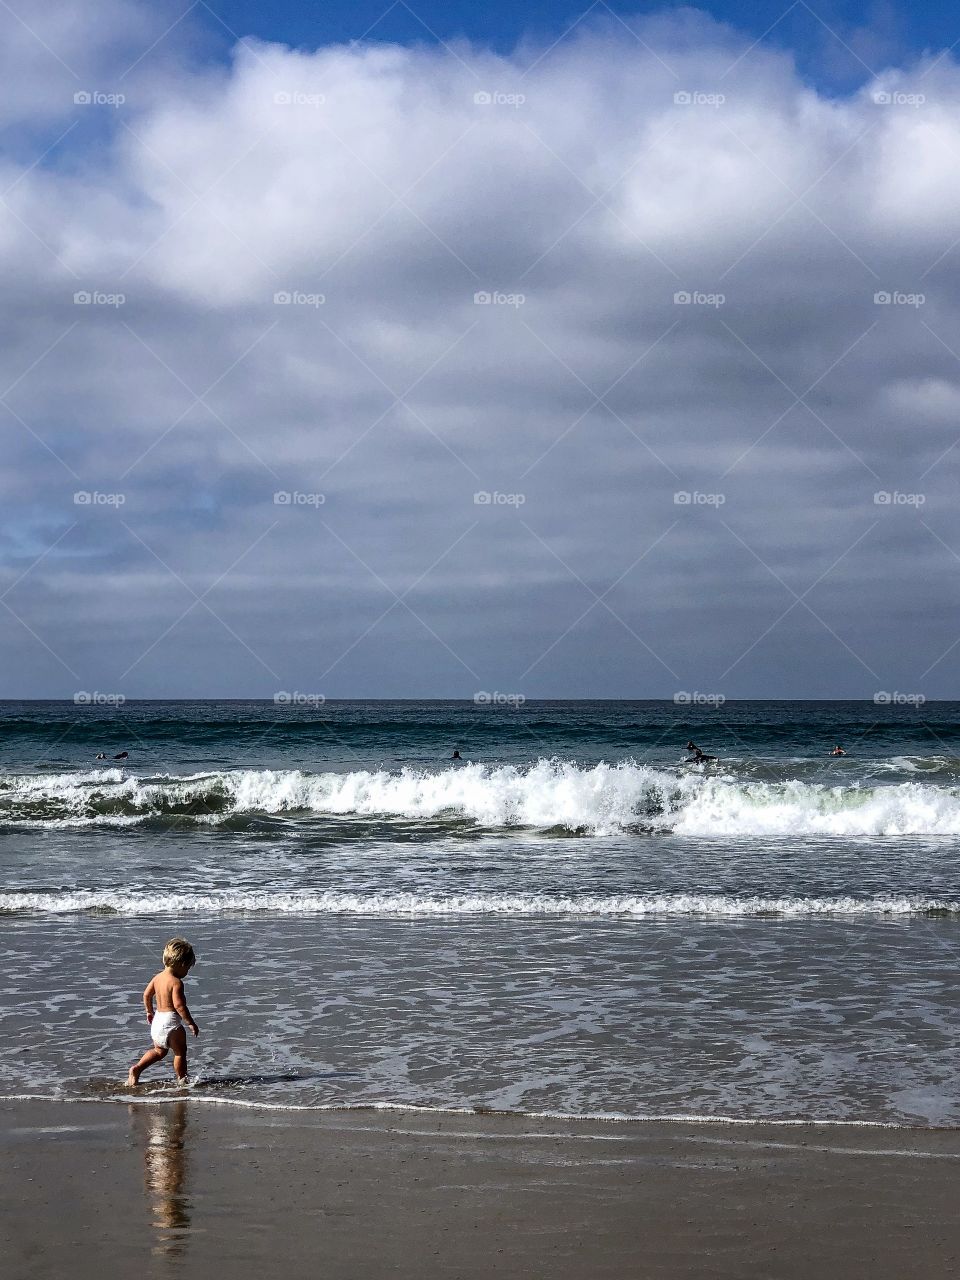 Foap Mission From Point A To B! Small Child In Diapers Testing The Waves At The Beach For The First Time!